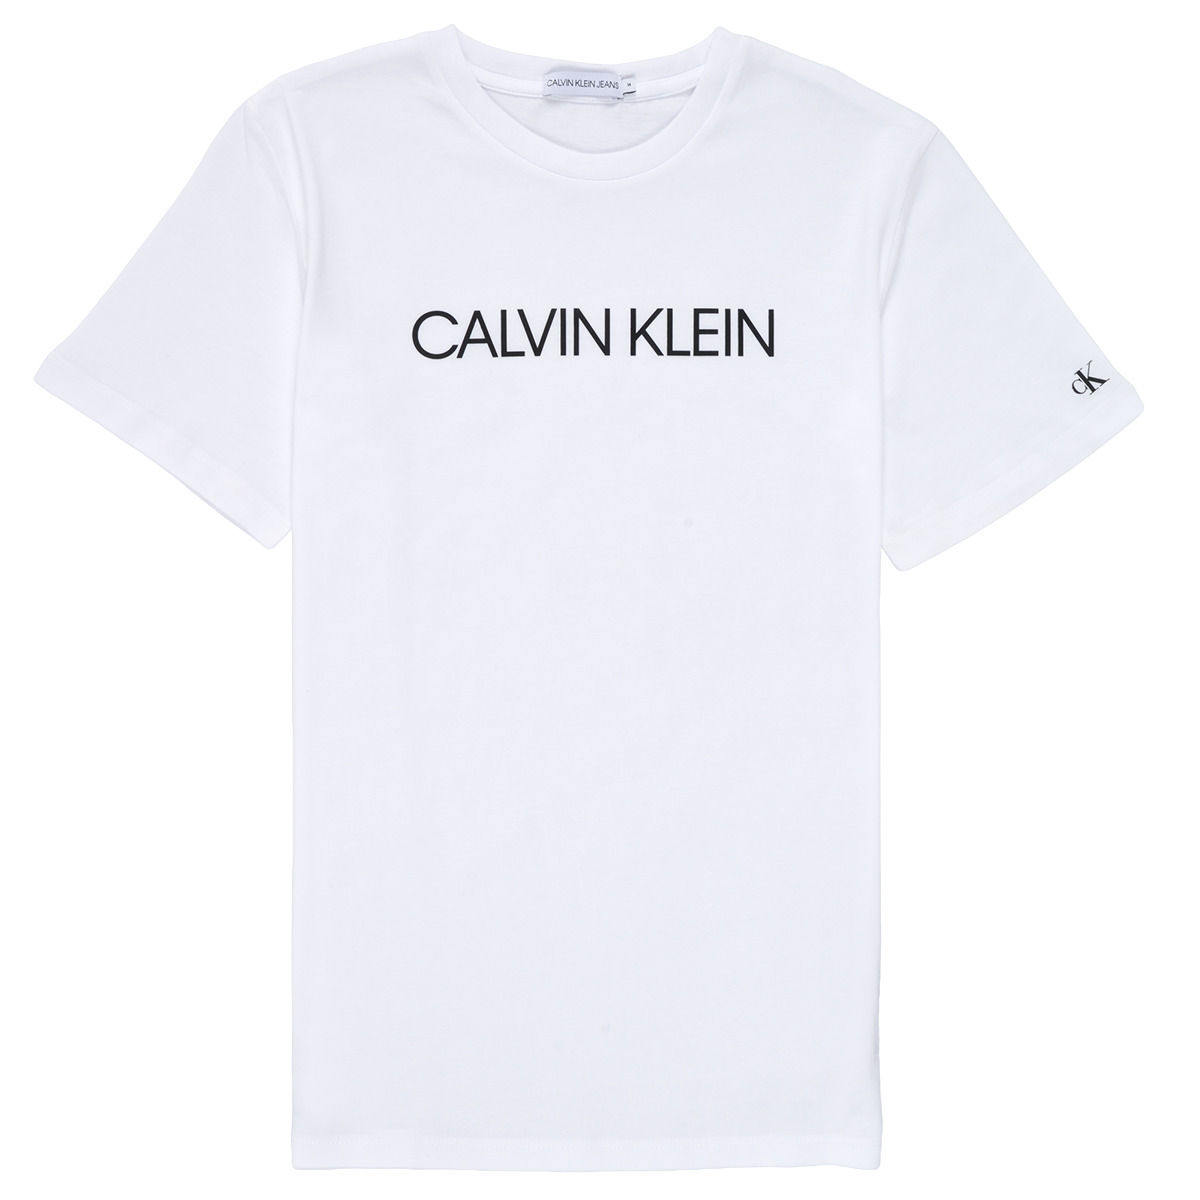 Calvin Klein Jeans INSTITUTIONAL T-SHIRT White - Free delivery | Spartoo  NET ! - Clothing short-sleeved t-shirts Child